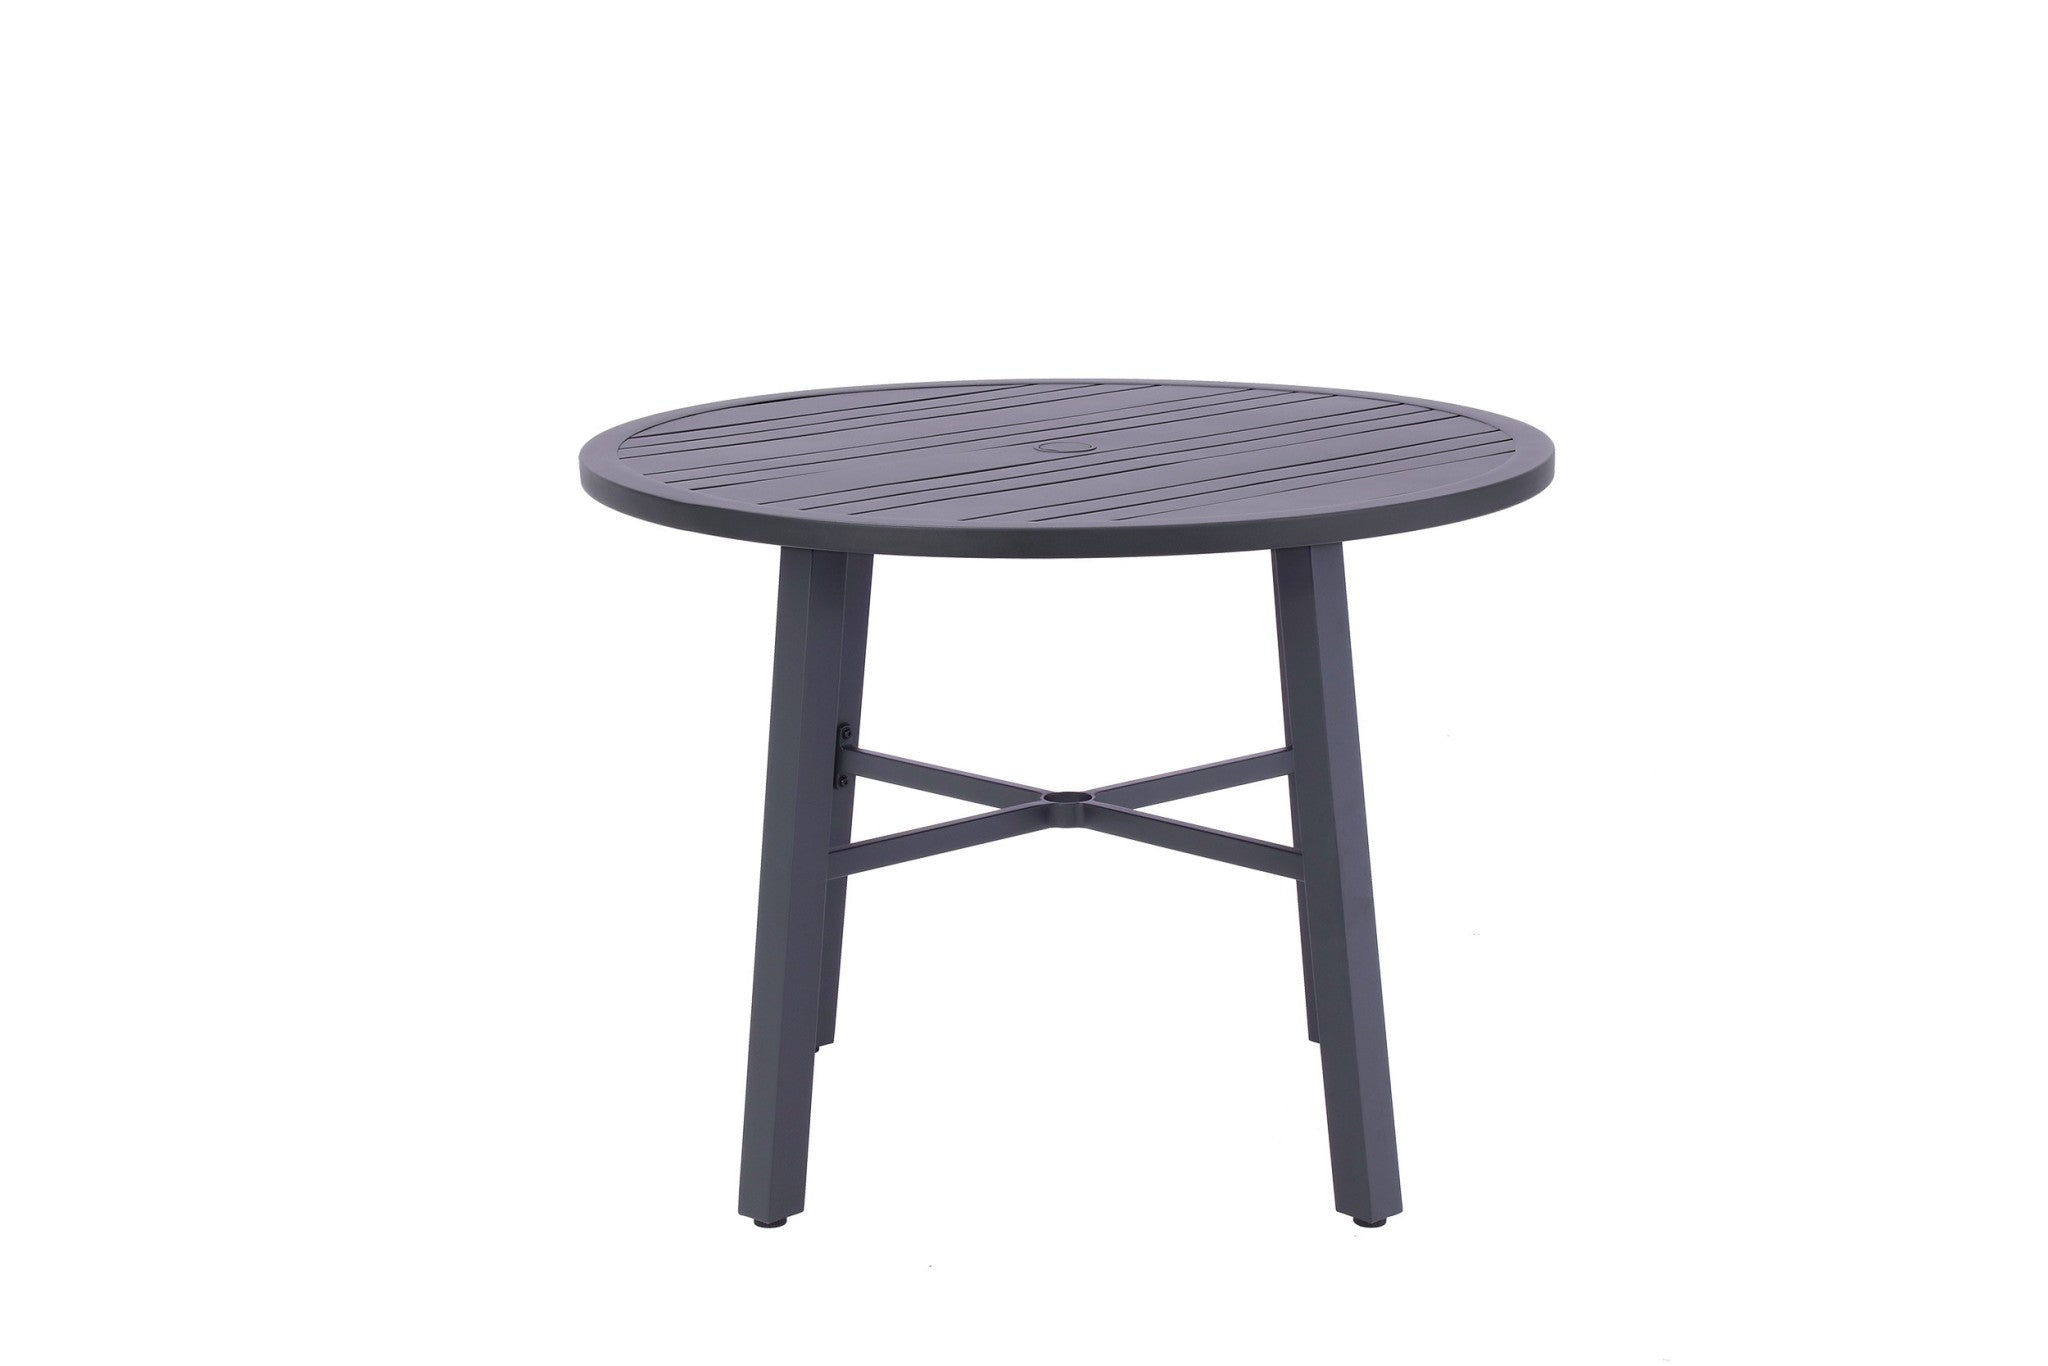 42" Black Rounded Metal Outdoor Dining Table With Umbrella Hole